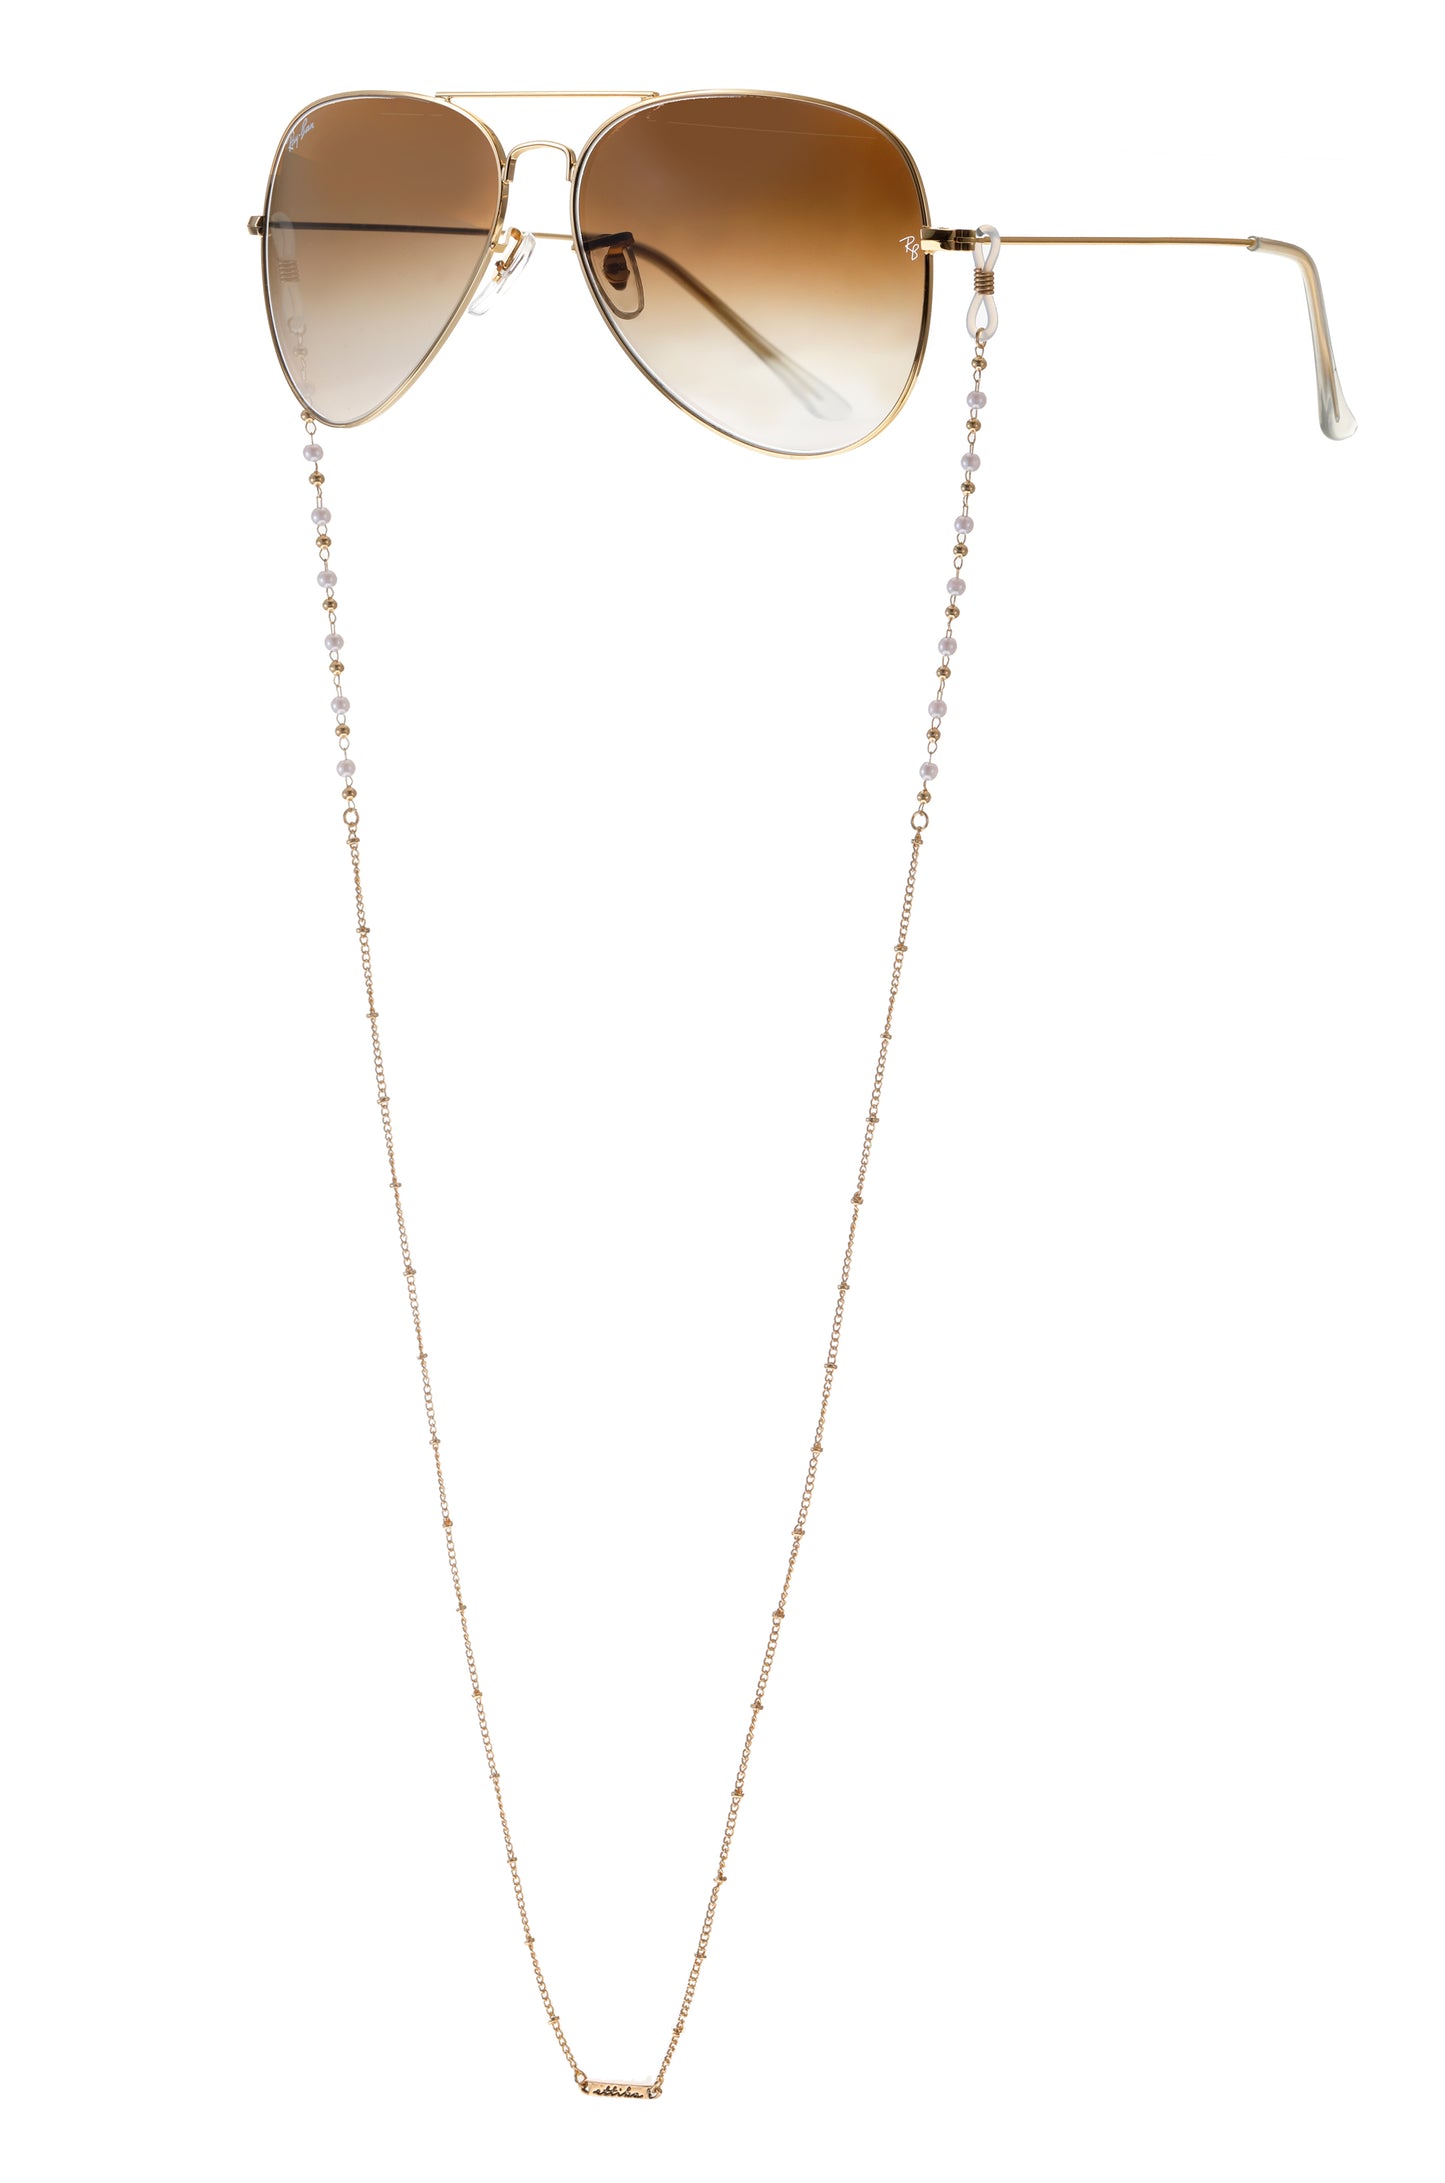 Dainty Pearl and Gold Glasses Chain on white